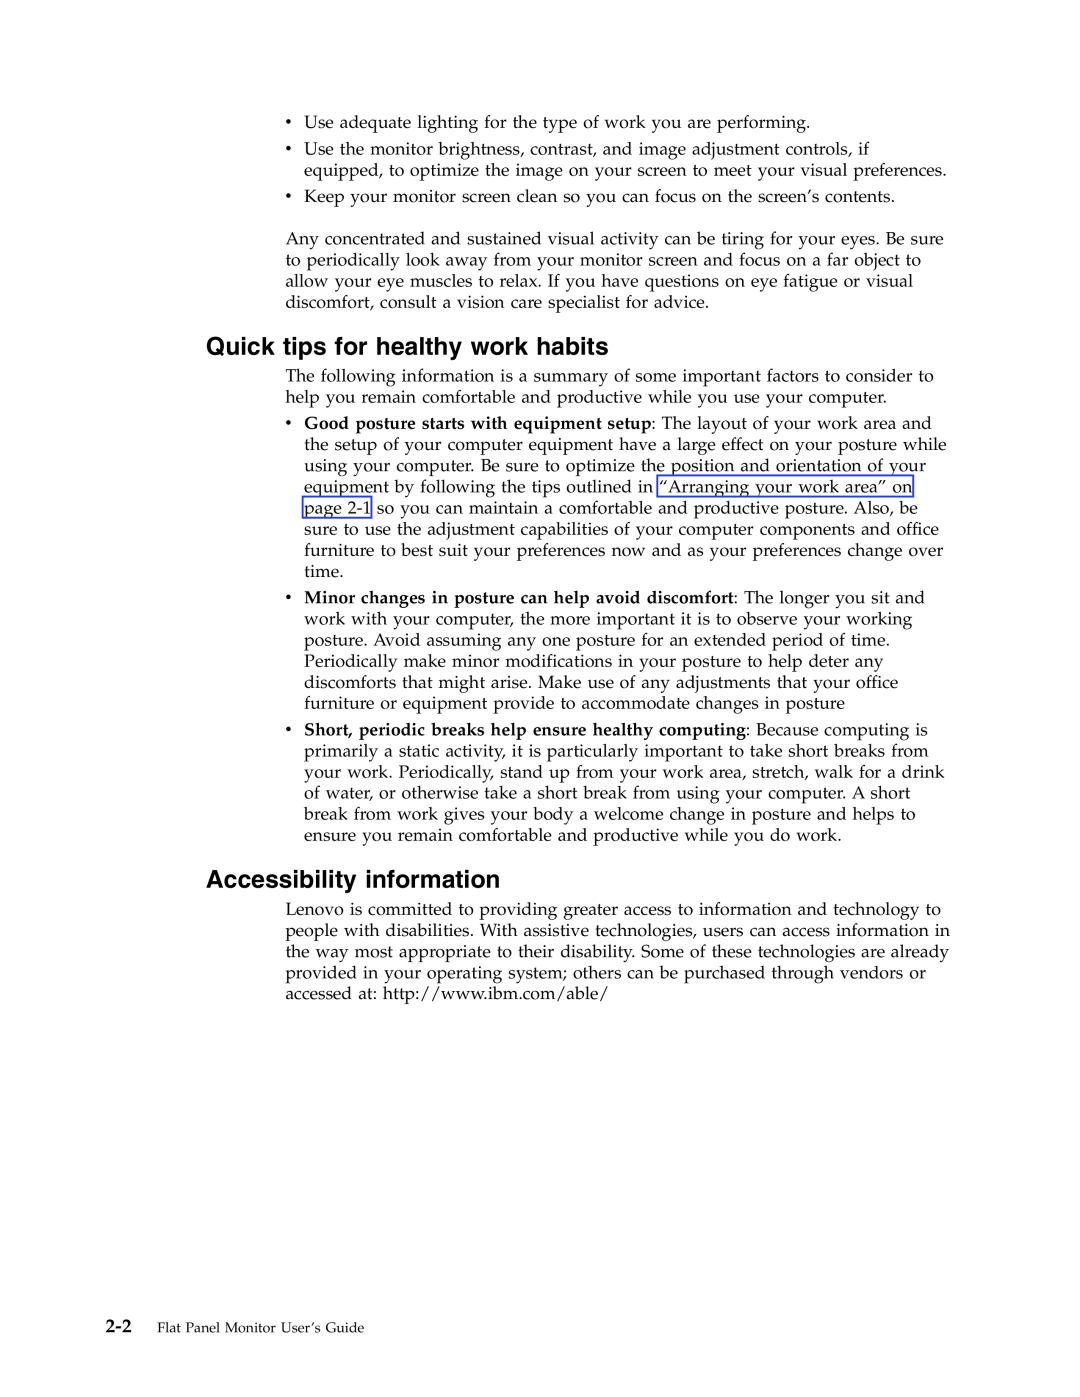 Lenovo 4428-AB1 manual Quick tips for healthy work habits, Accessibility information 